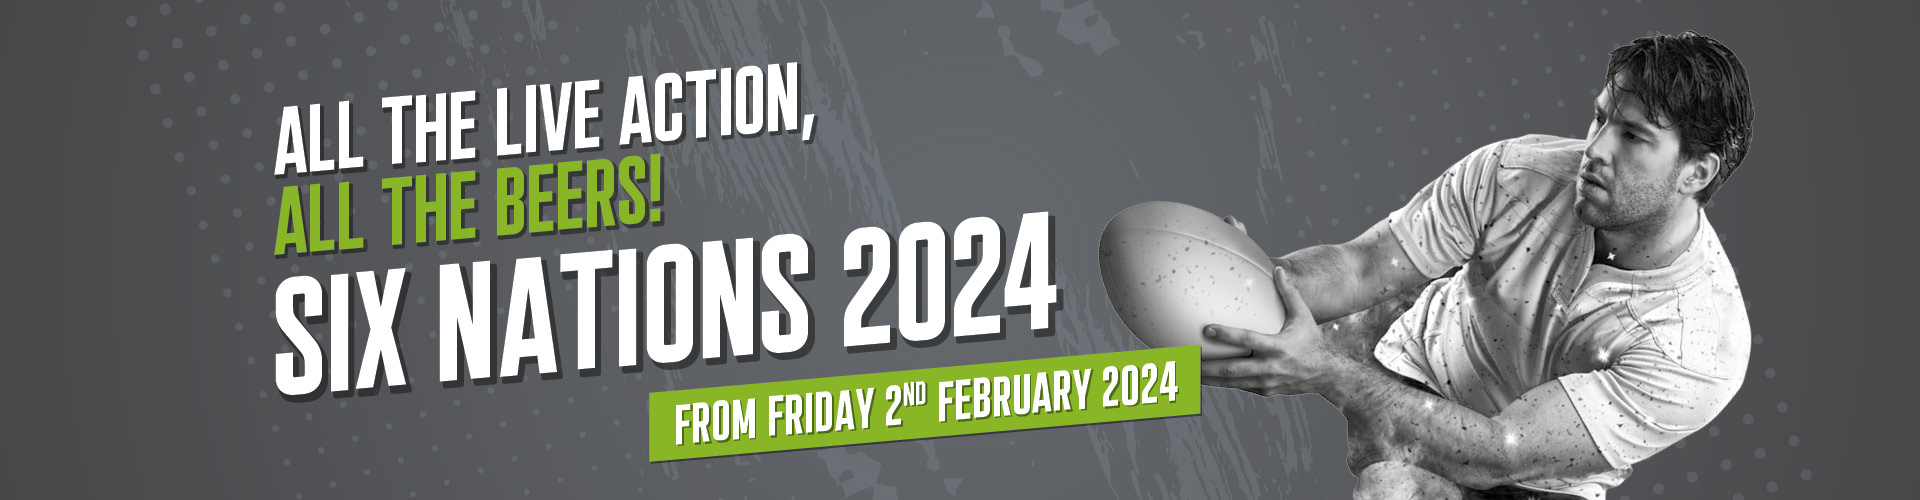 Six Nations 2024 at The Beaconsfield Arms